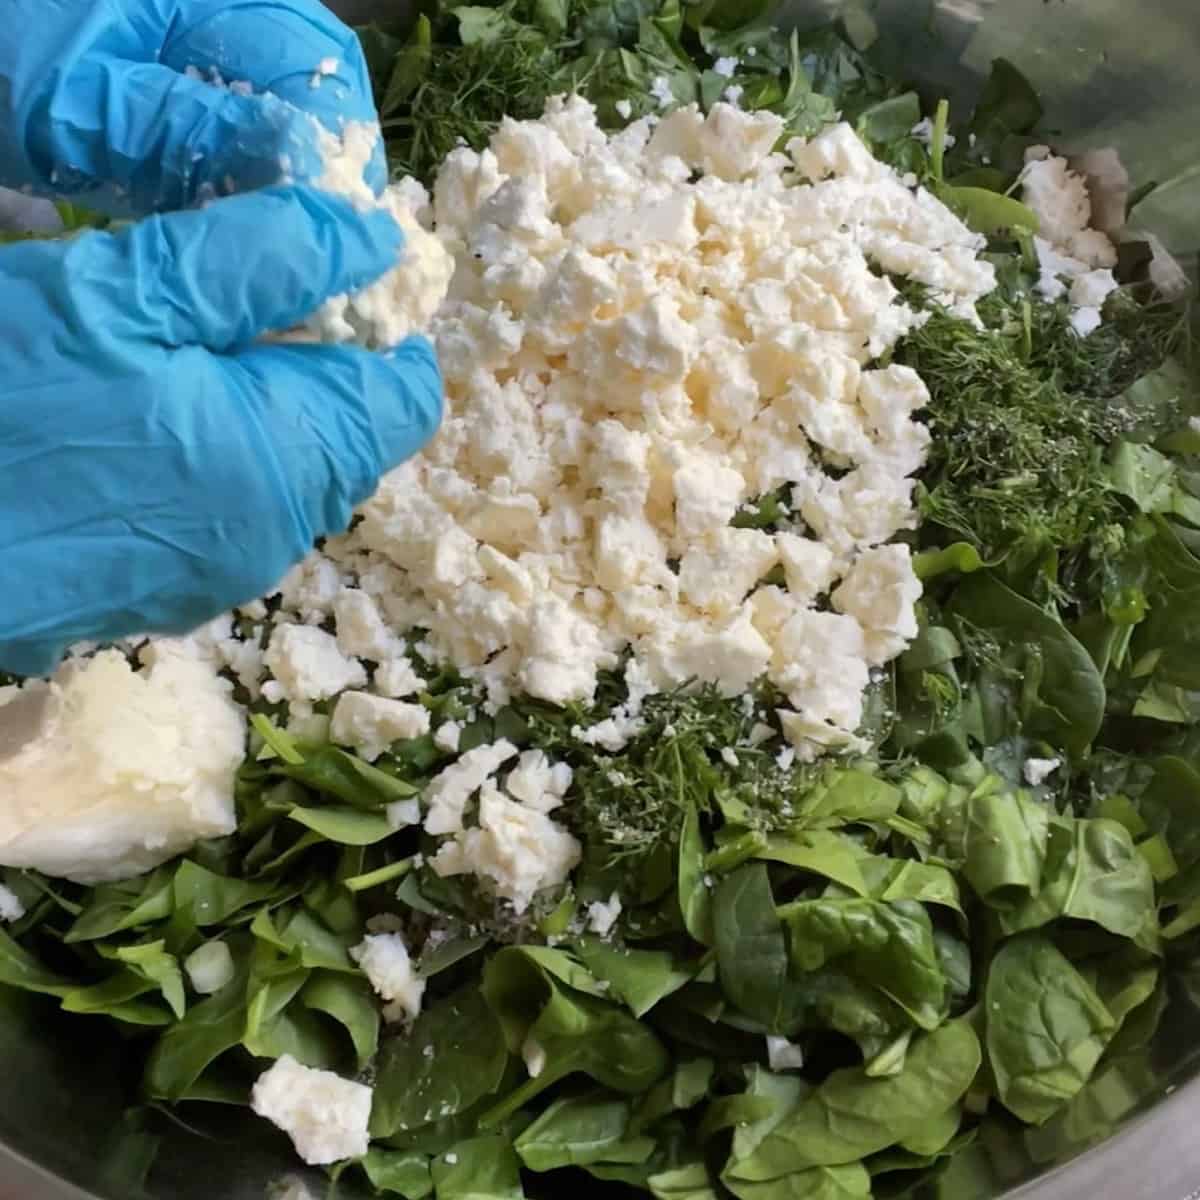 Feta cheese being crumbled over the rest of the spinach filling process 1